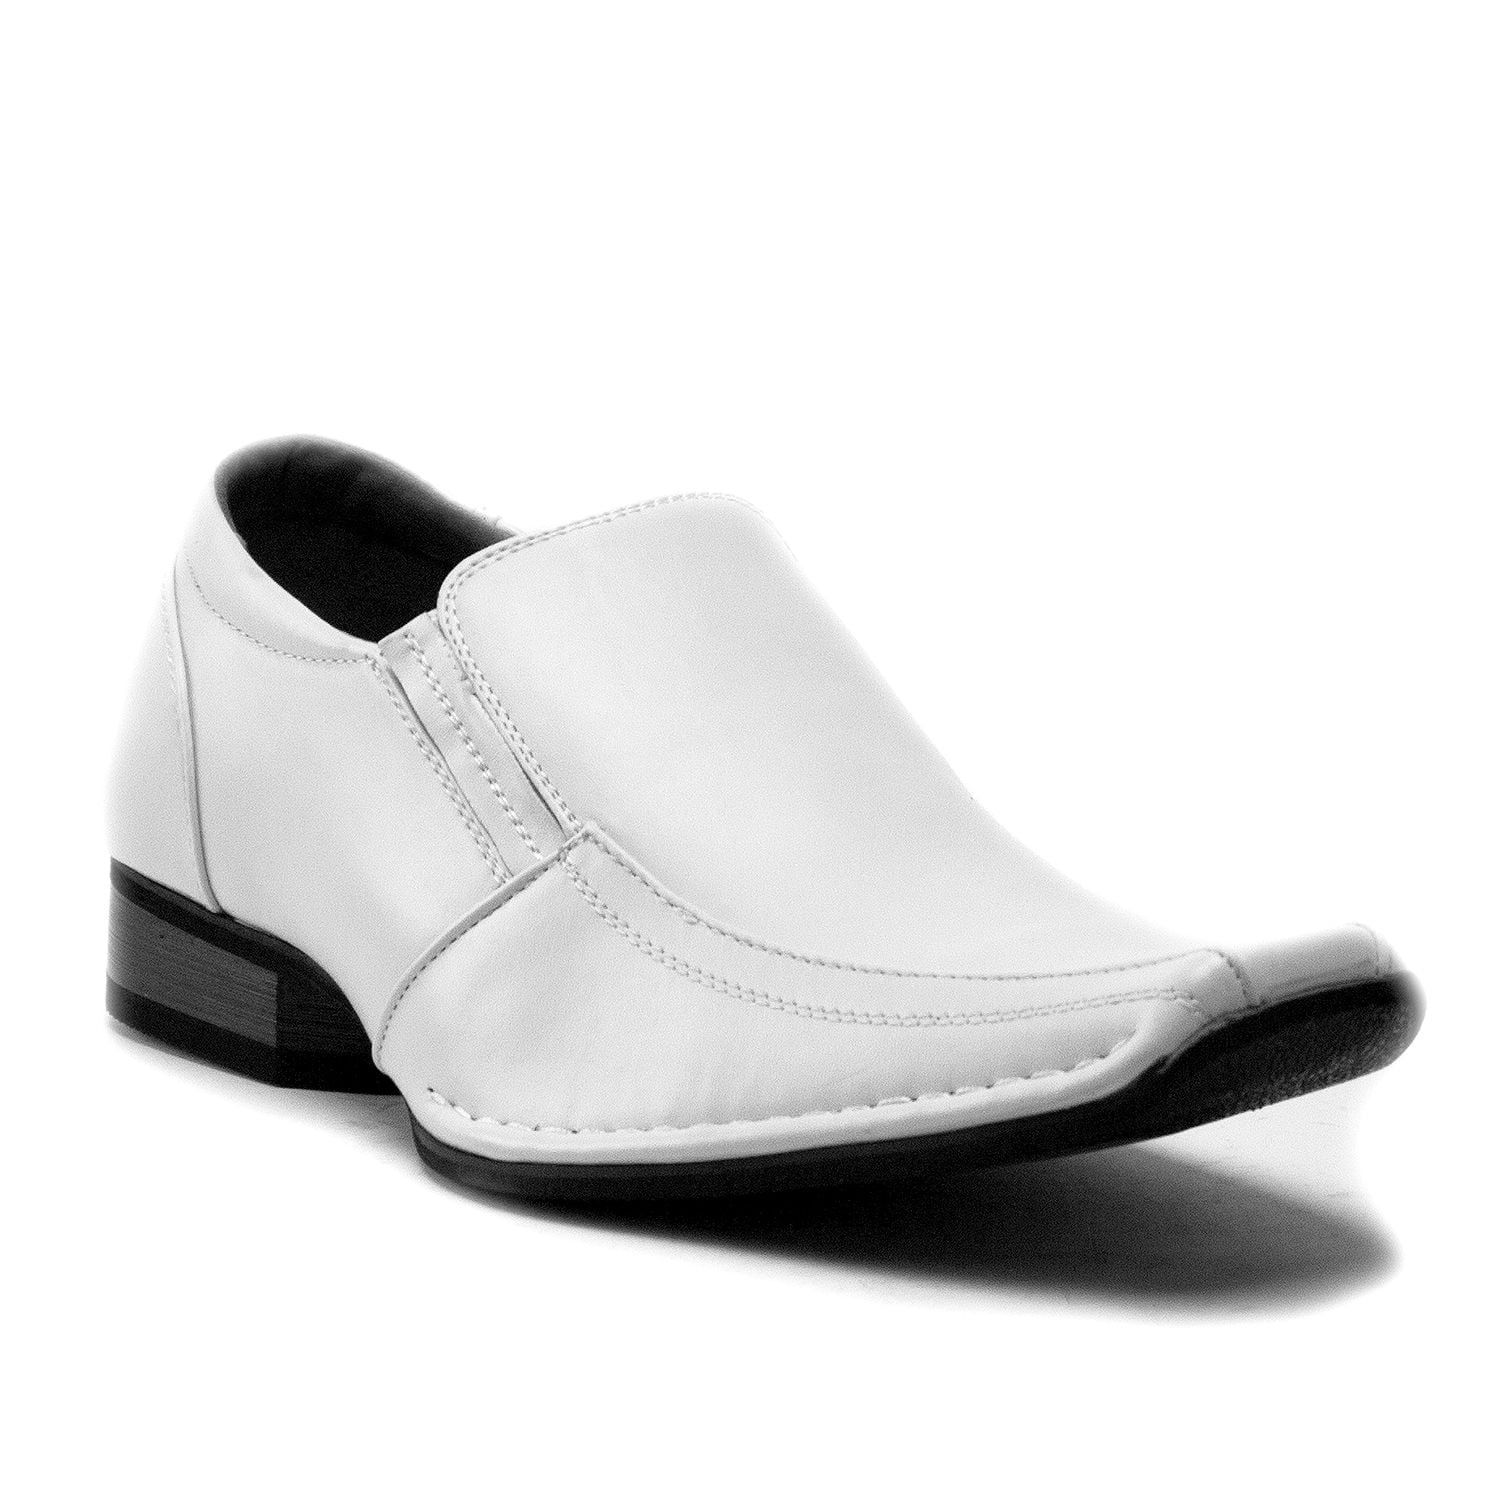 Men's Classic Square Toe Slip On Loafer Shoes Formal Business Comfort Shoes